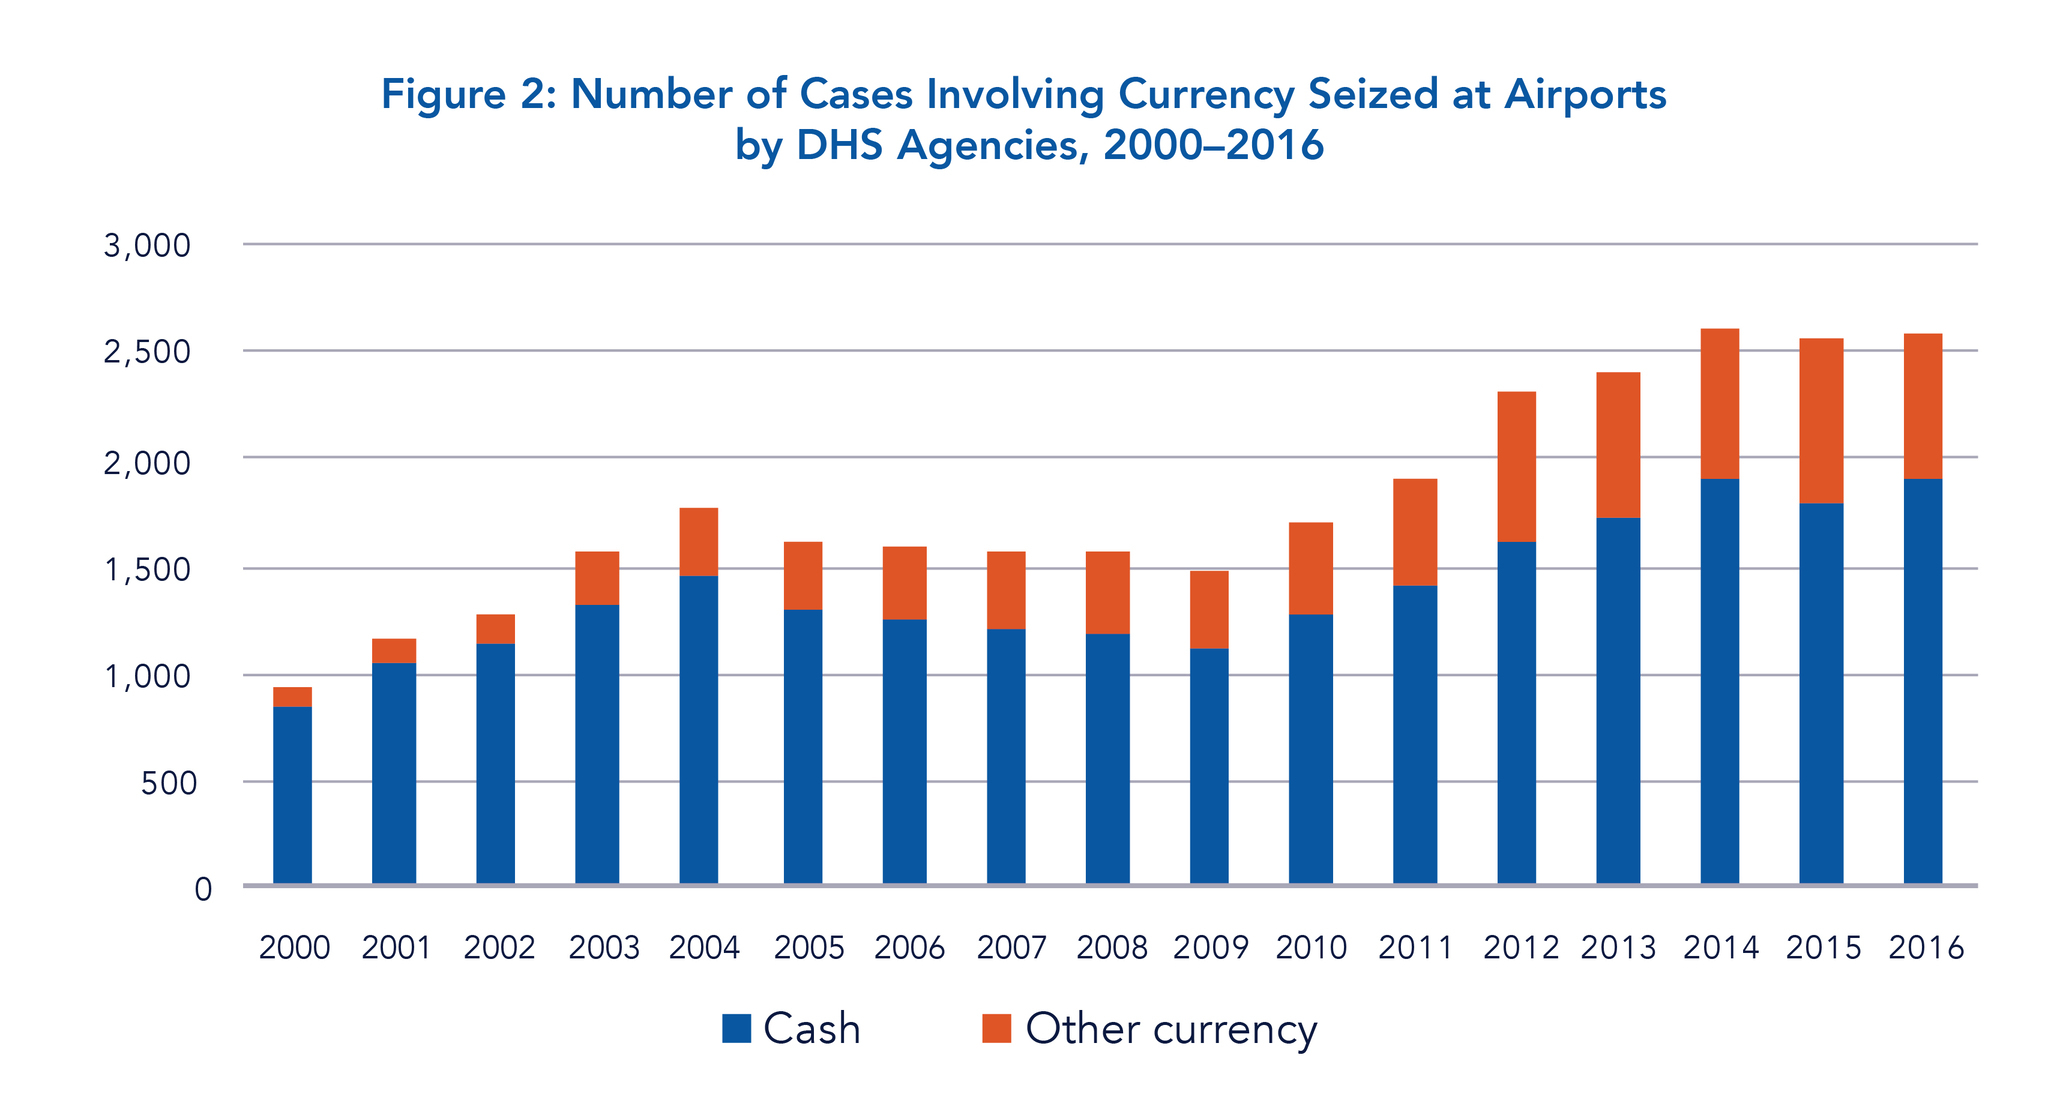 Number of Cases Involving Currency seized by DHS 2000-2016